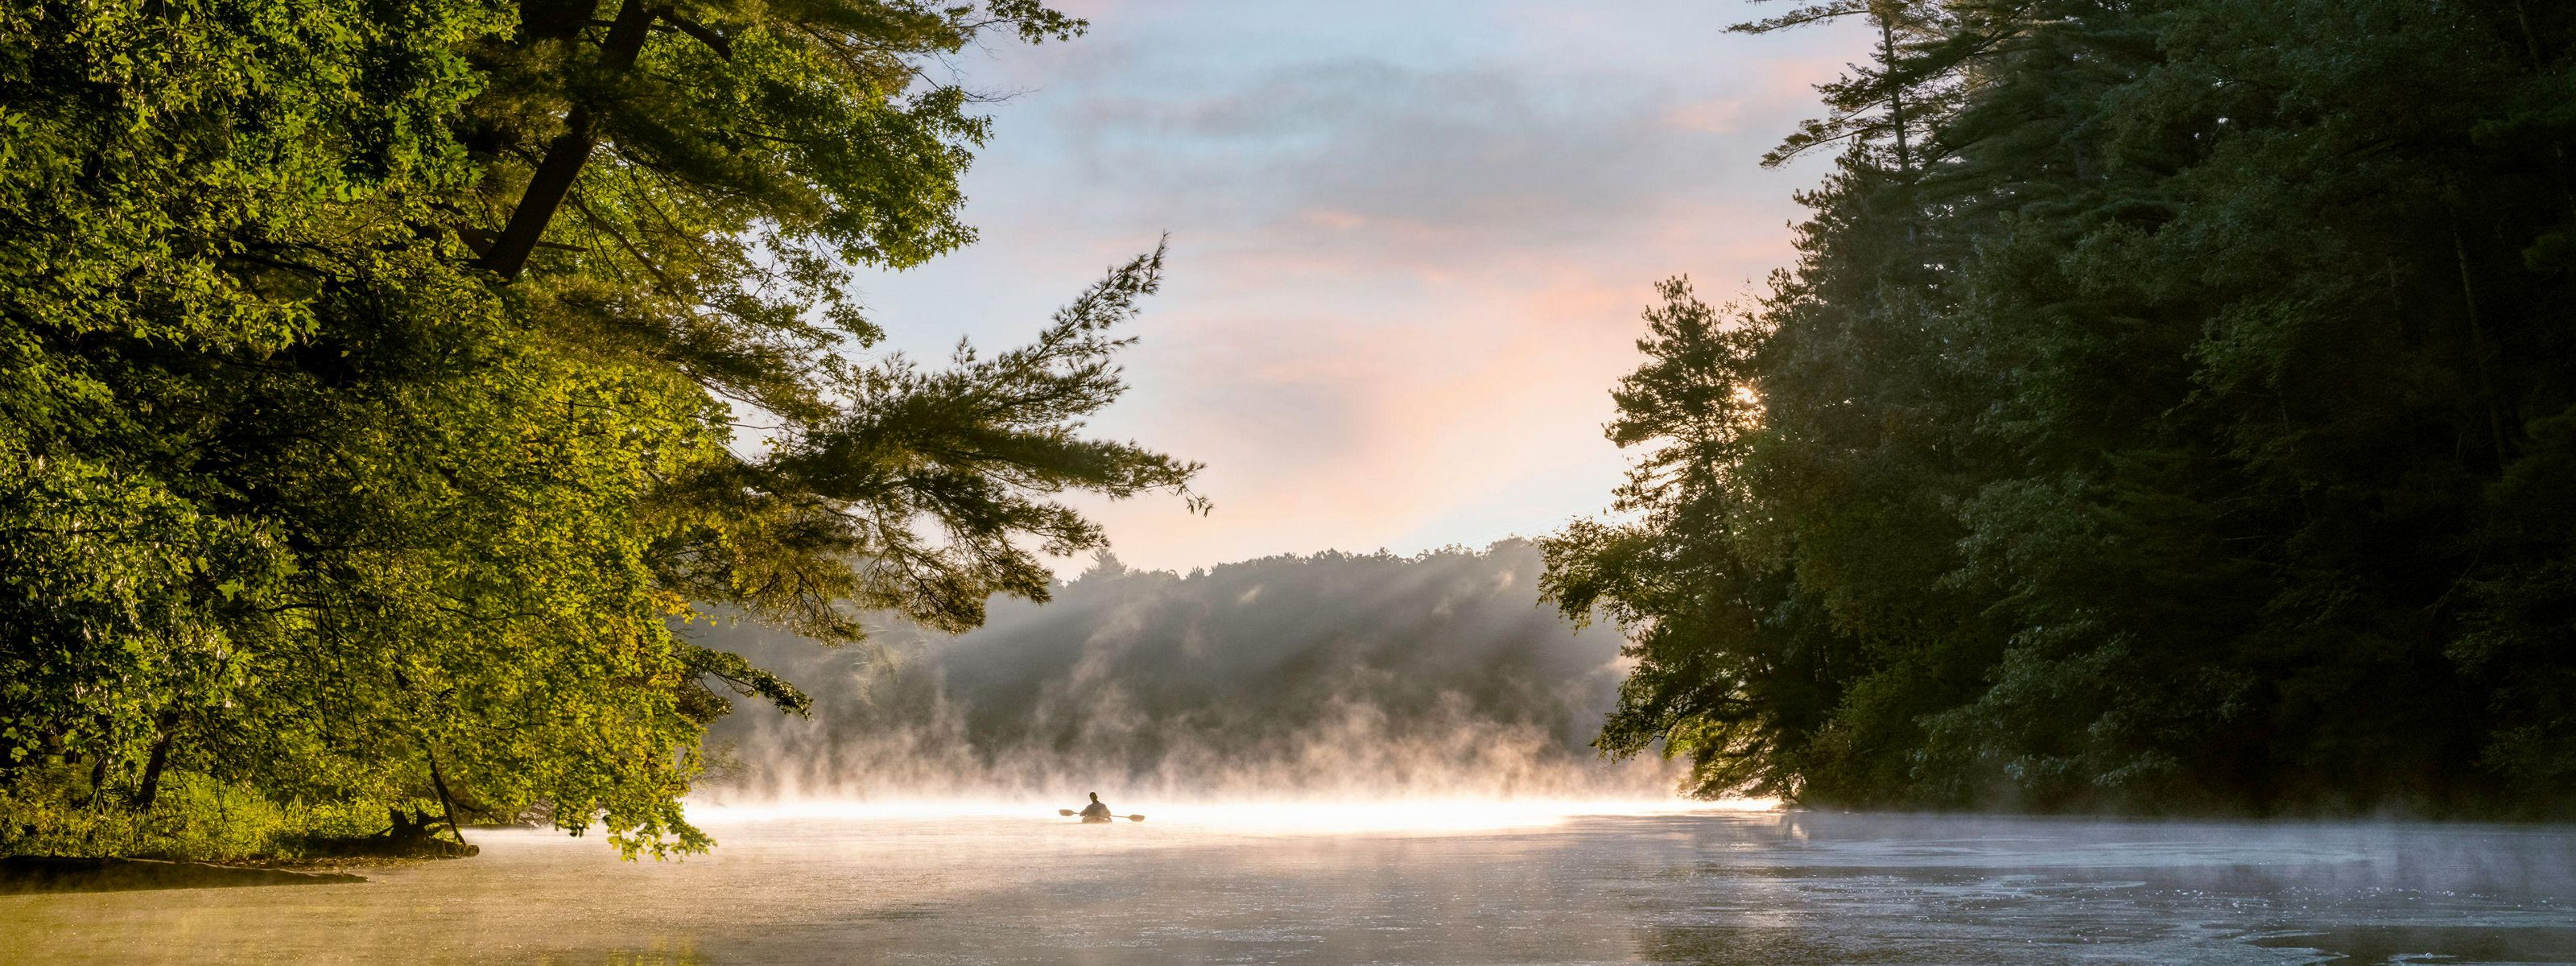 A person kayaking on a lake with big evergreen trees overhanging the water and fog lifting off the water.